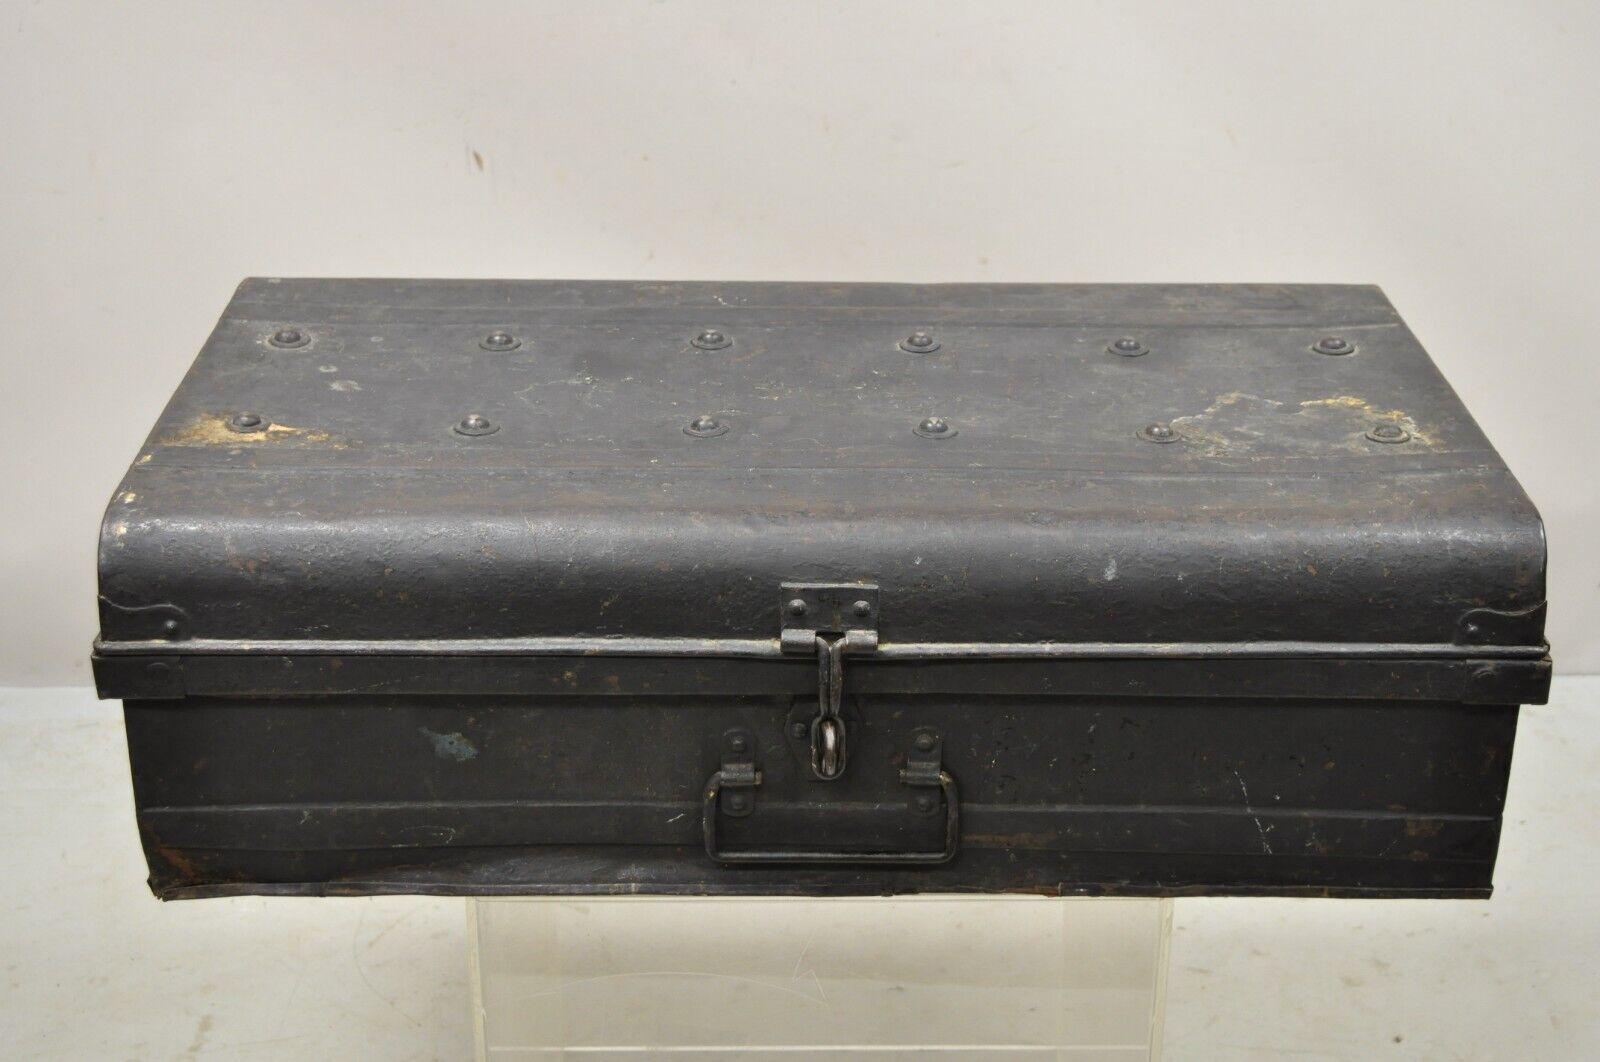 Antique Art Deco steel metal military weapons black storage travel trunk. Item features a steel metal construction, distressed finish, very nice antique item, great style and form, circa early 20th century. Measurements: 9.5